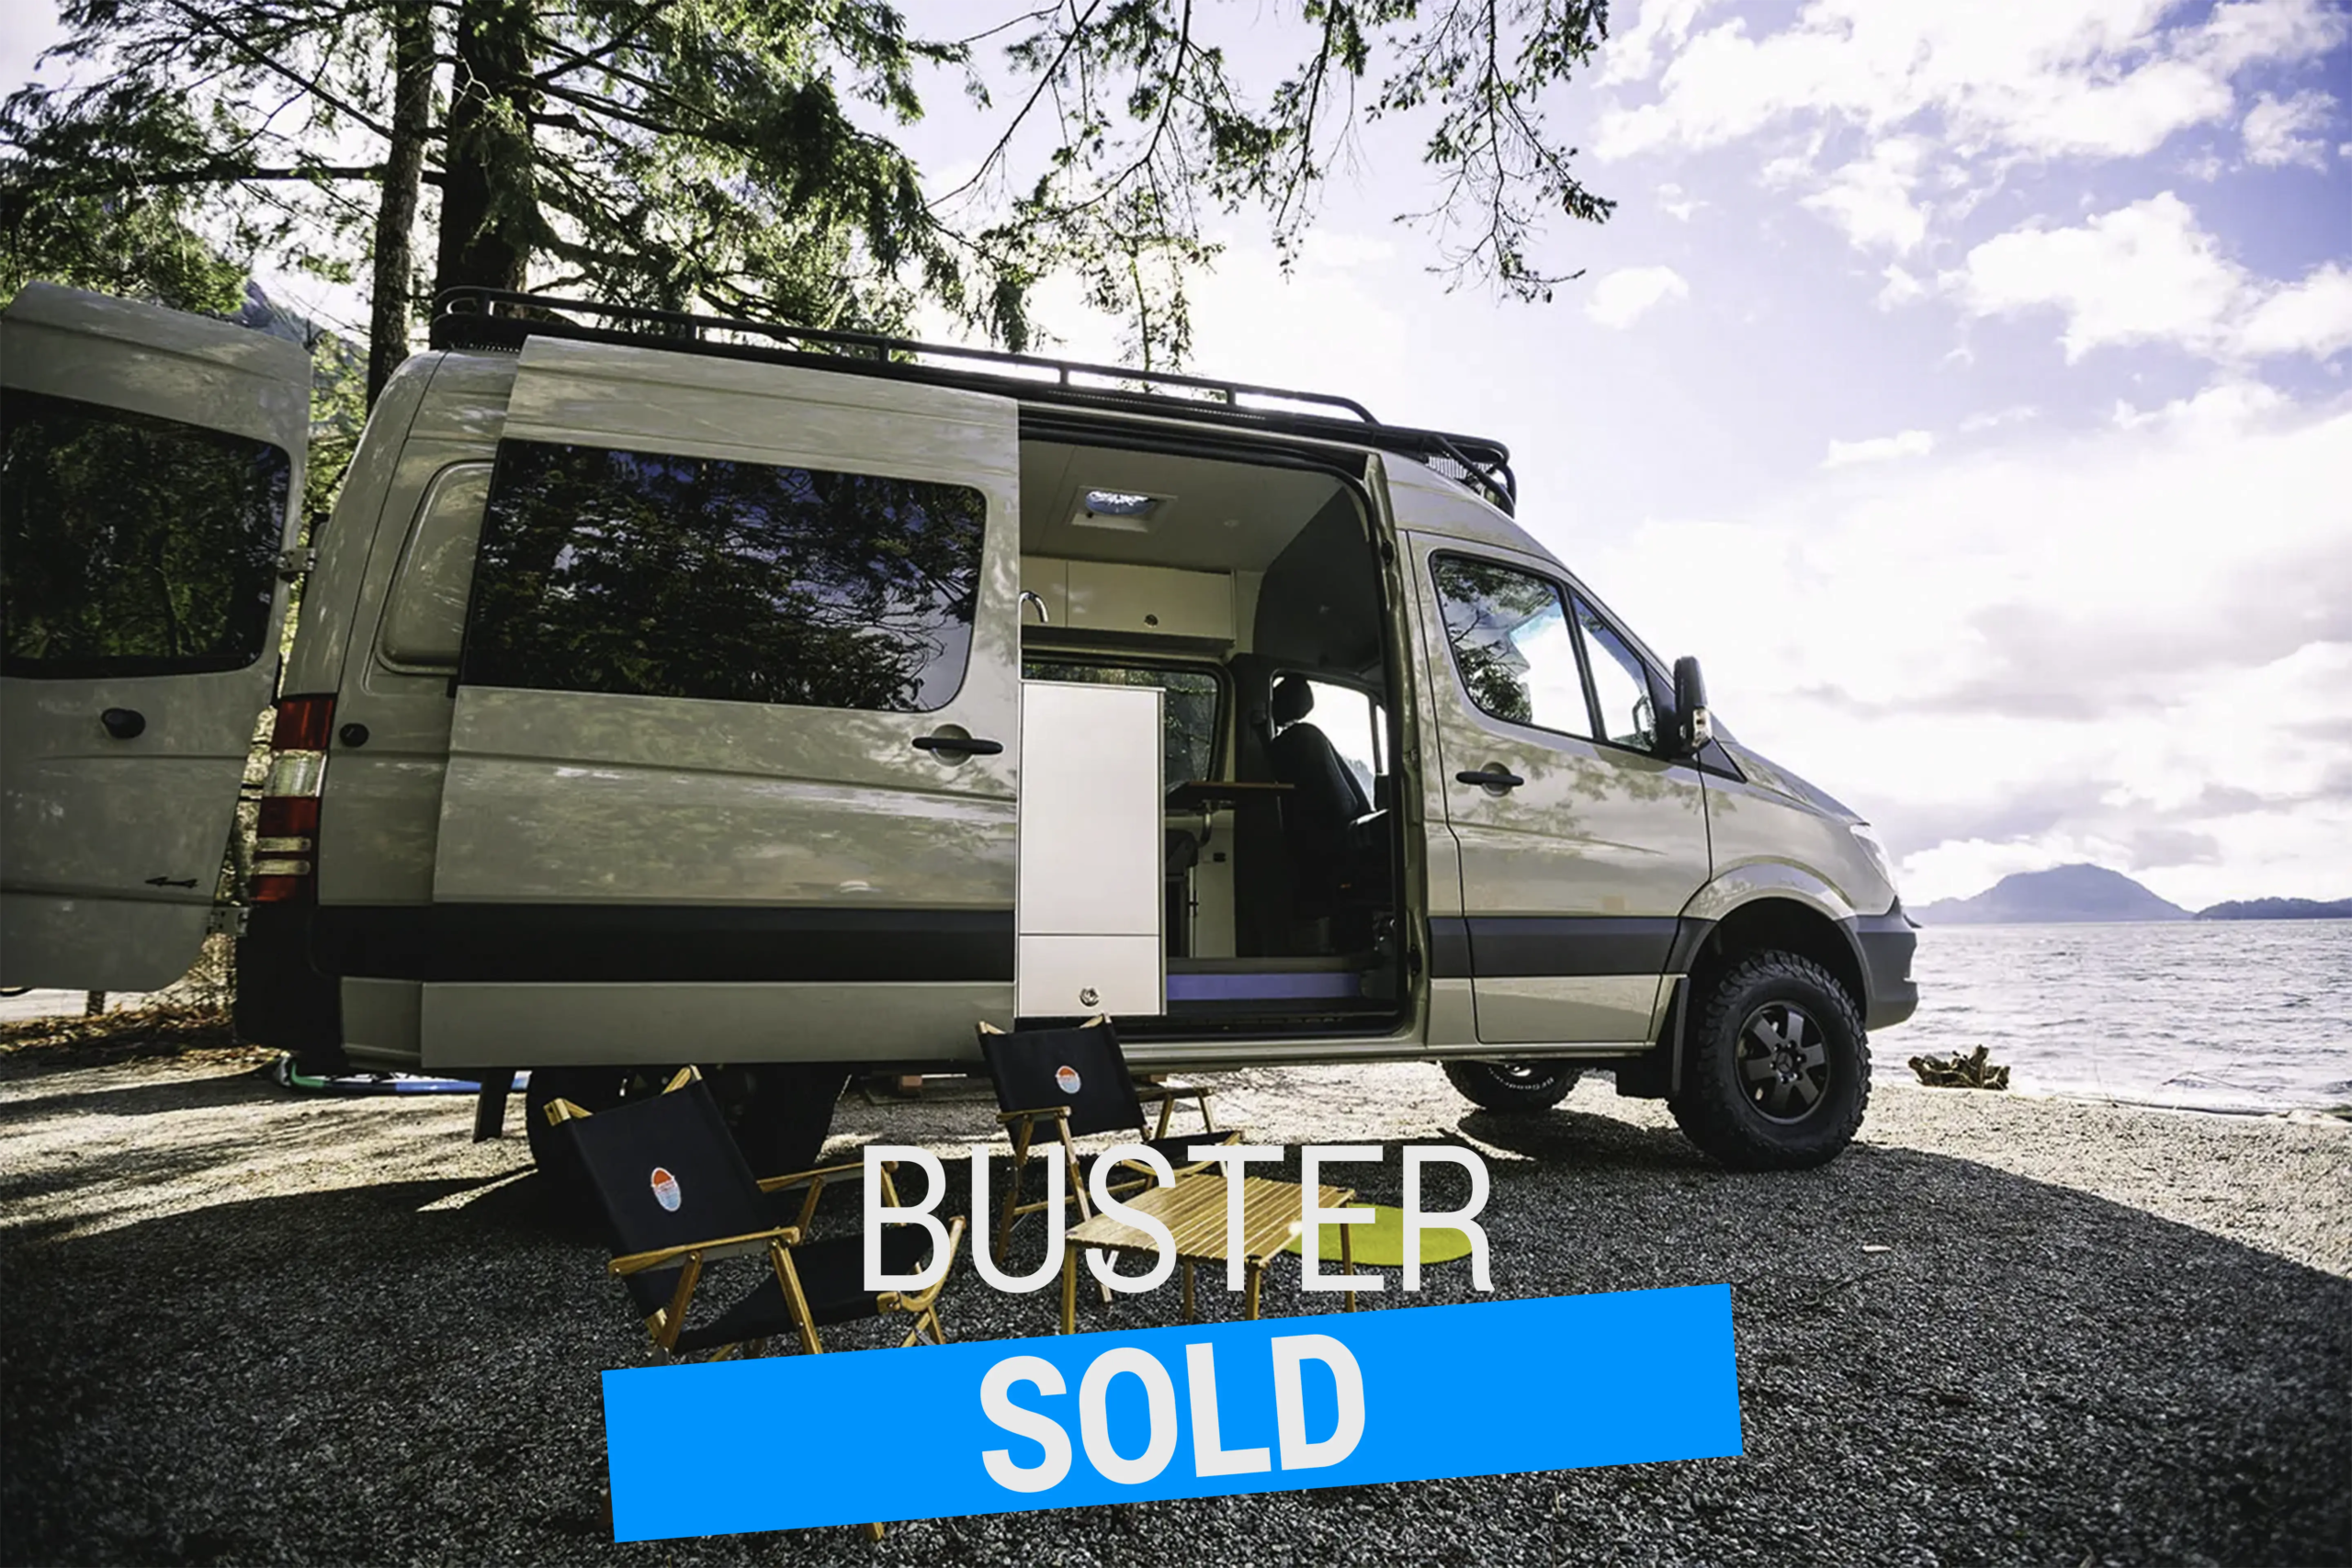 Buster 144 WB High Roof 4x4 2500 Premium Conversion by Nomad Vanz